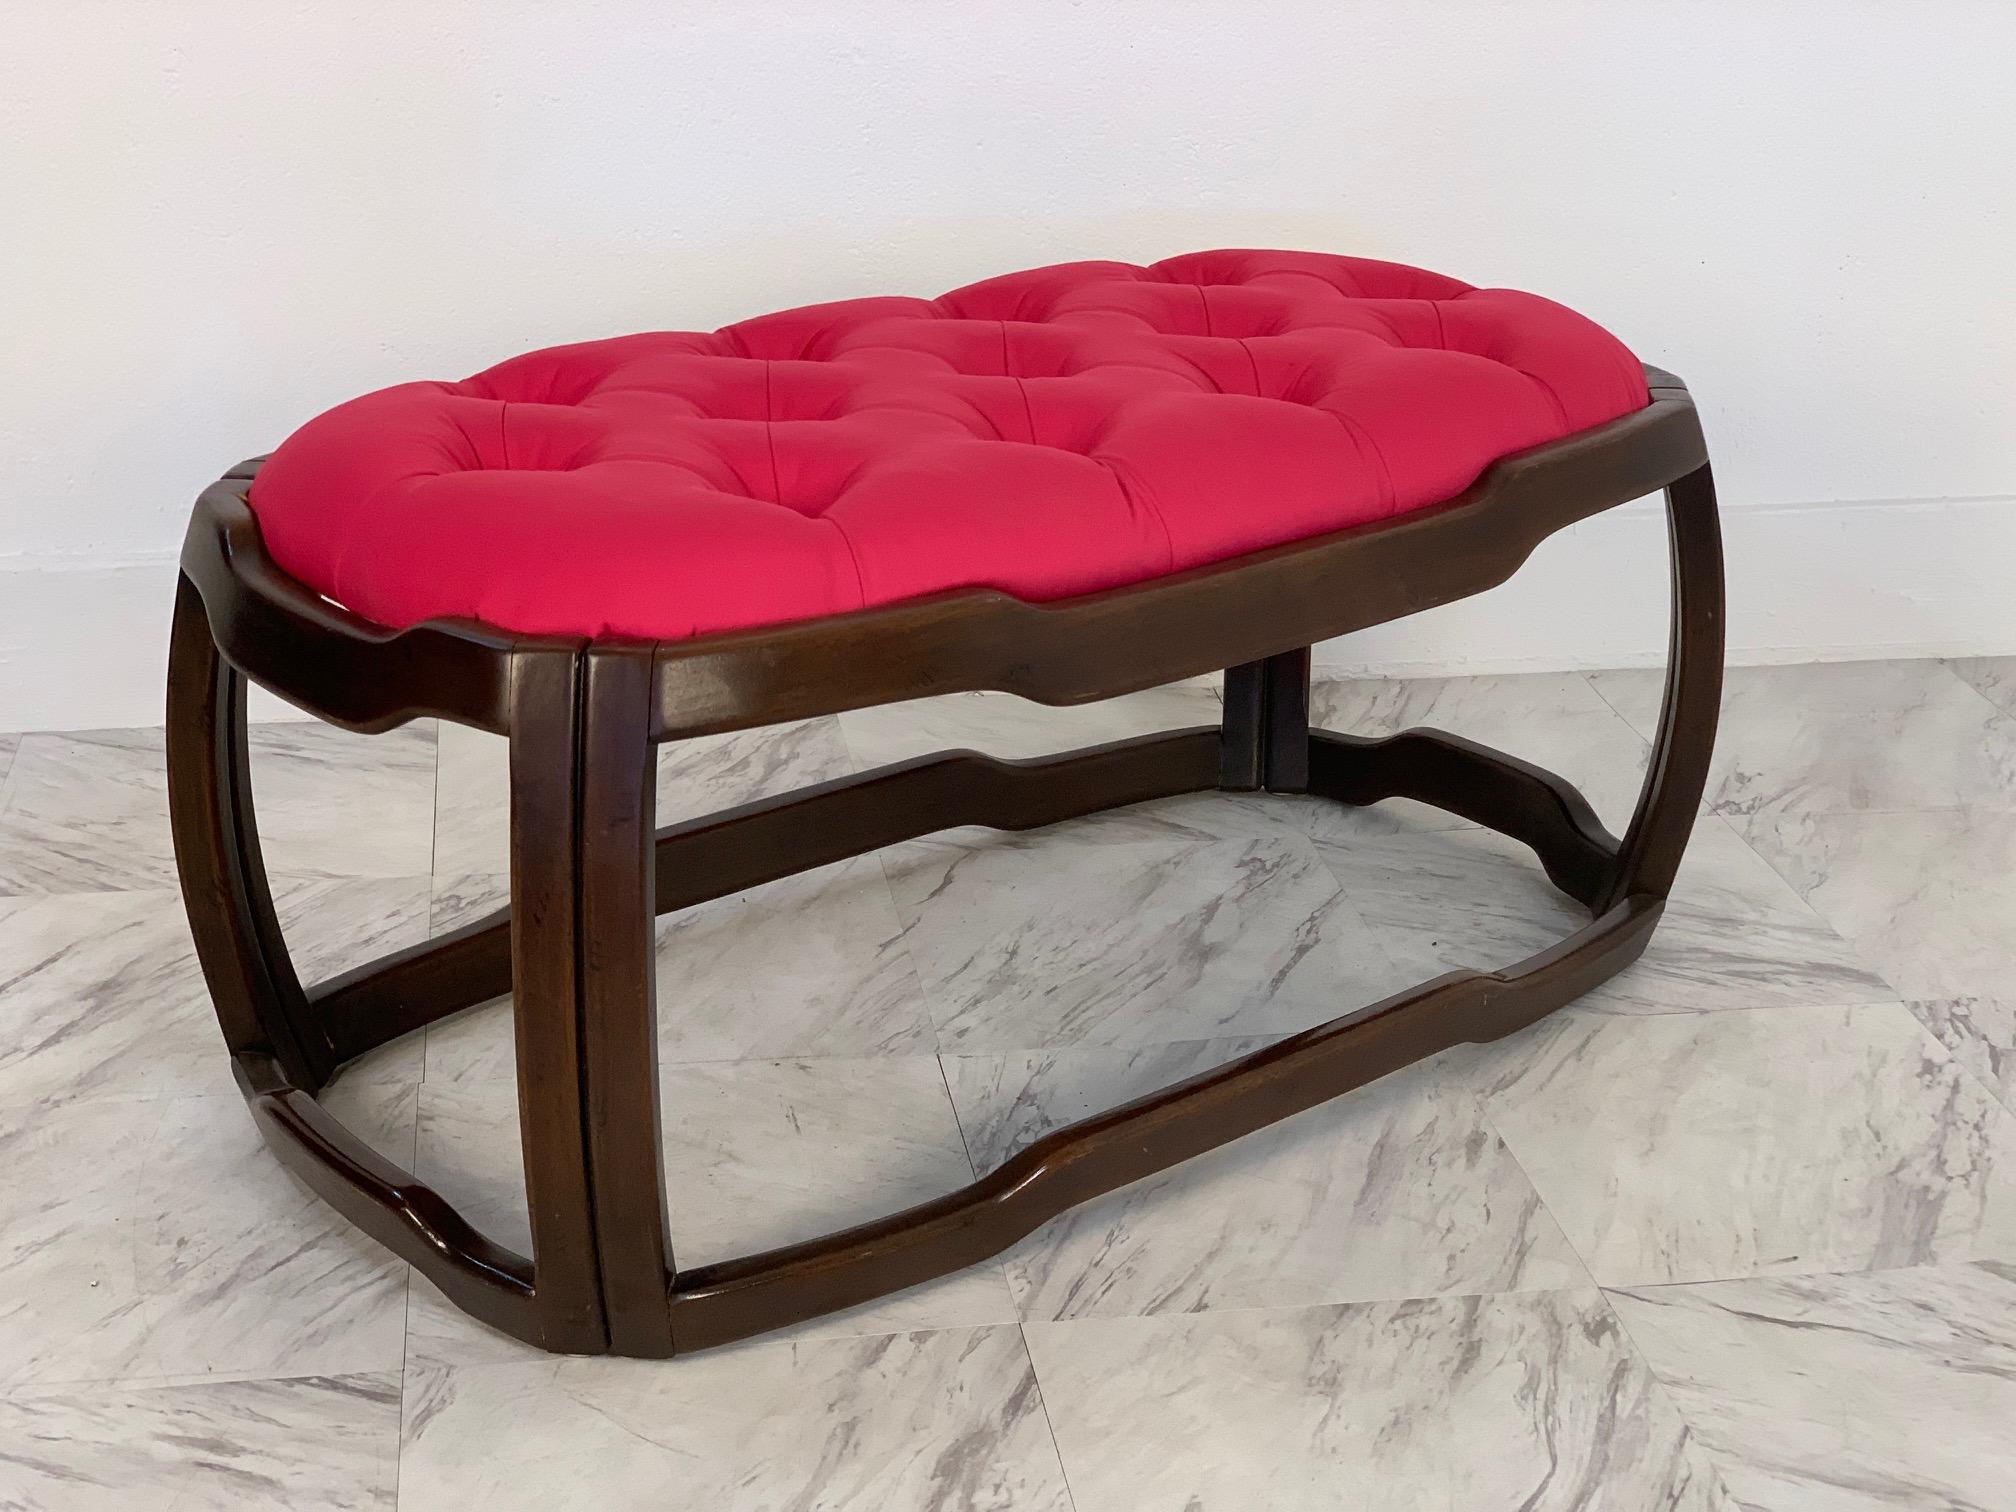 Mid-Century Modern Asian style tufted upholstered bench. The bench has a solid mahogany frame with an upholstered tufted seat cushion.